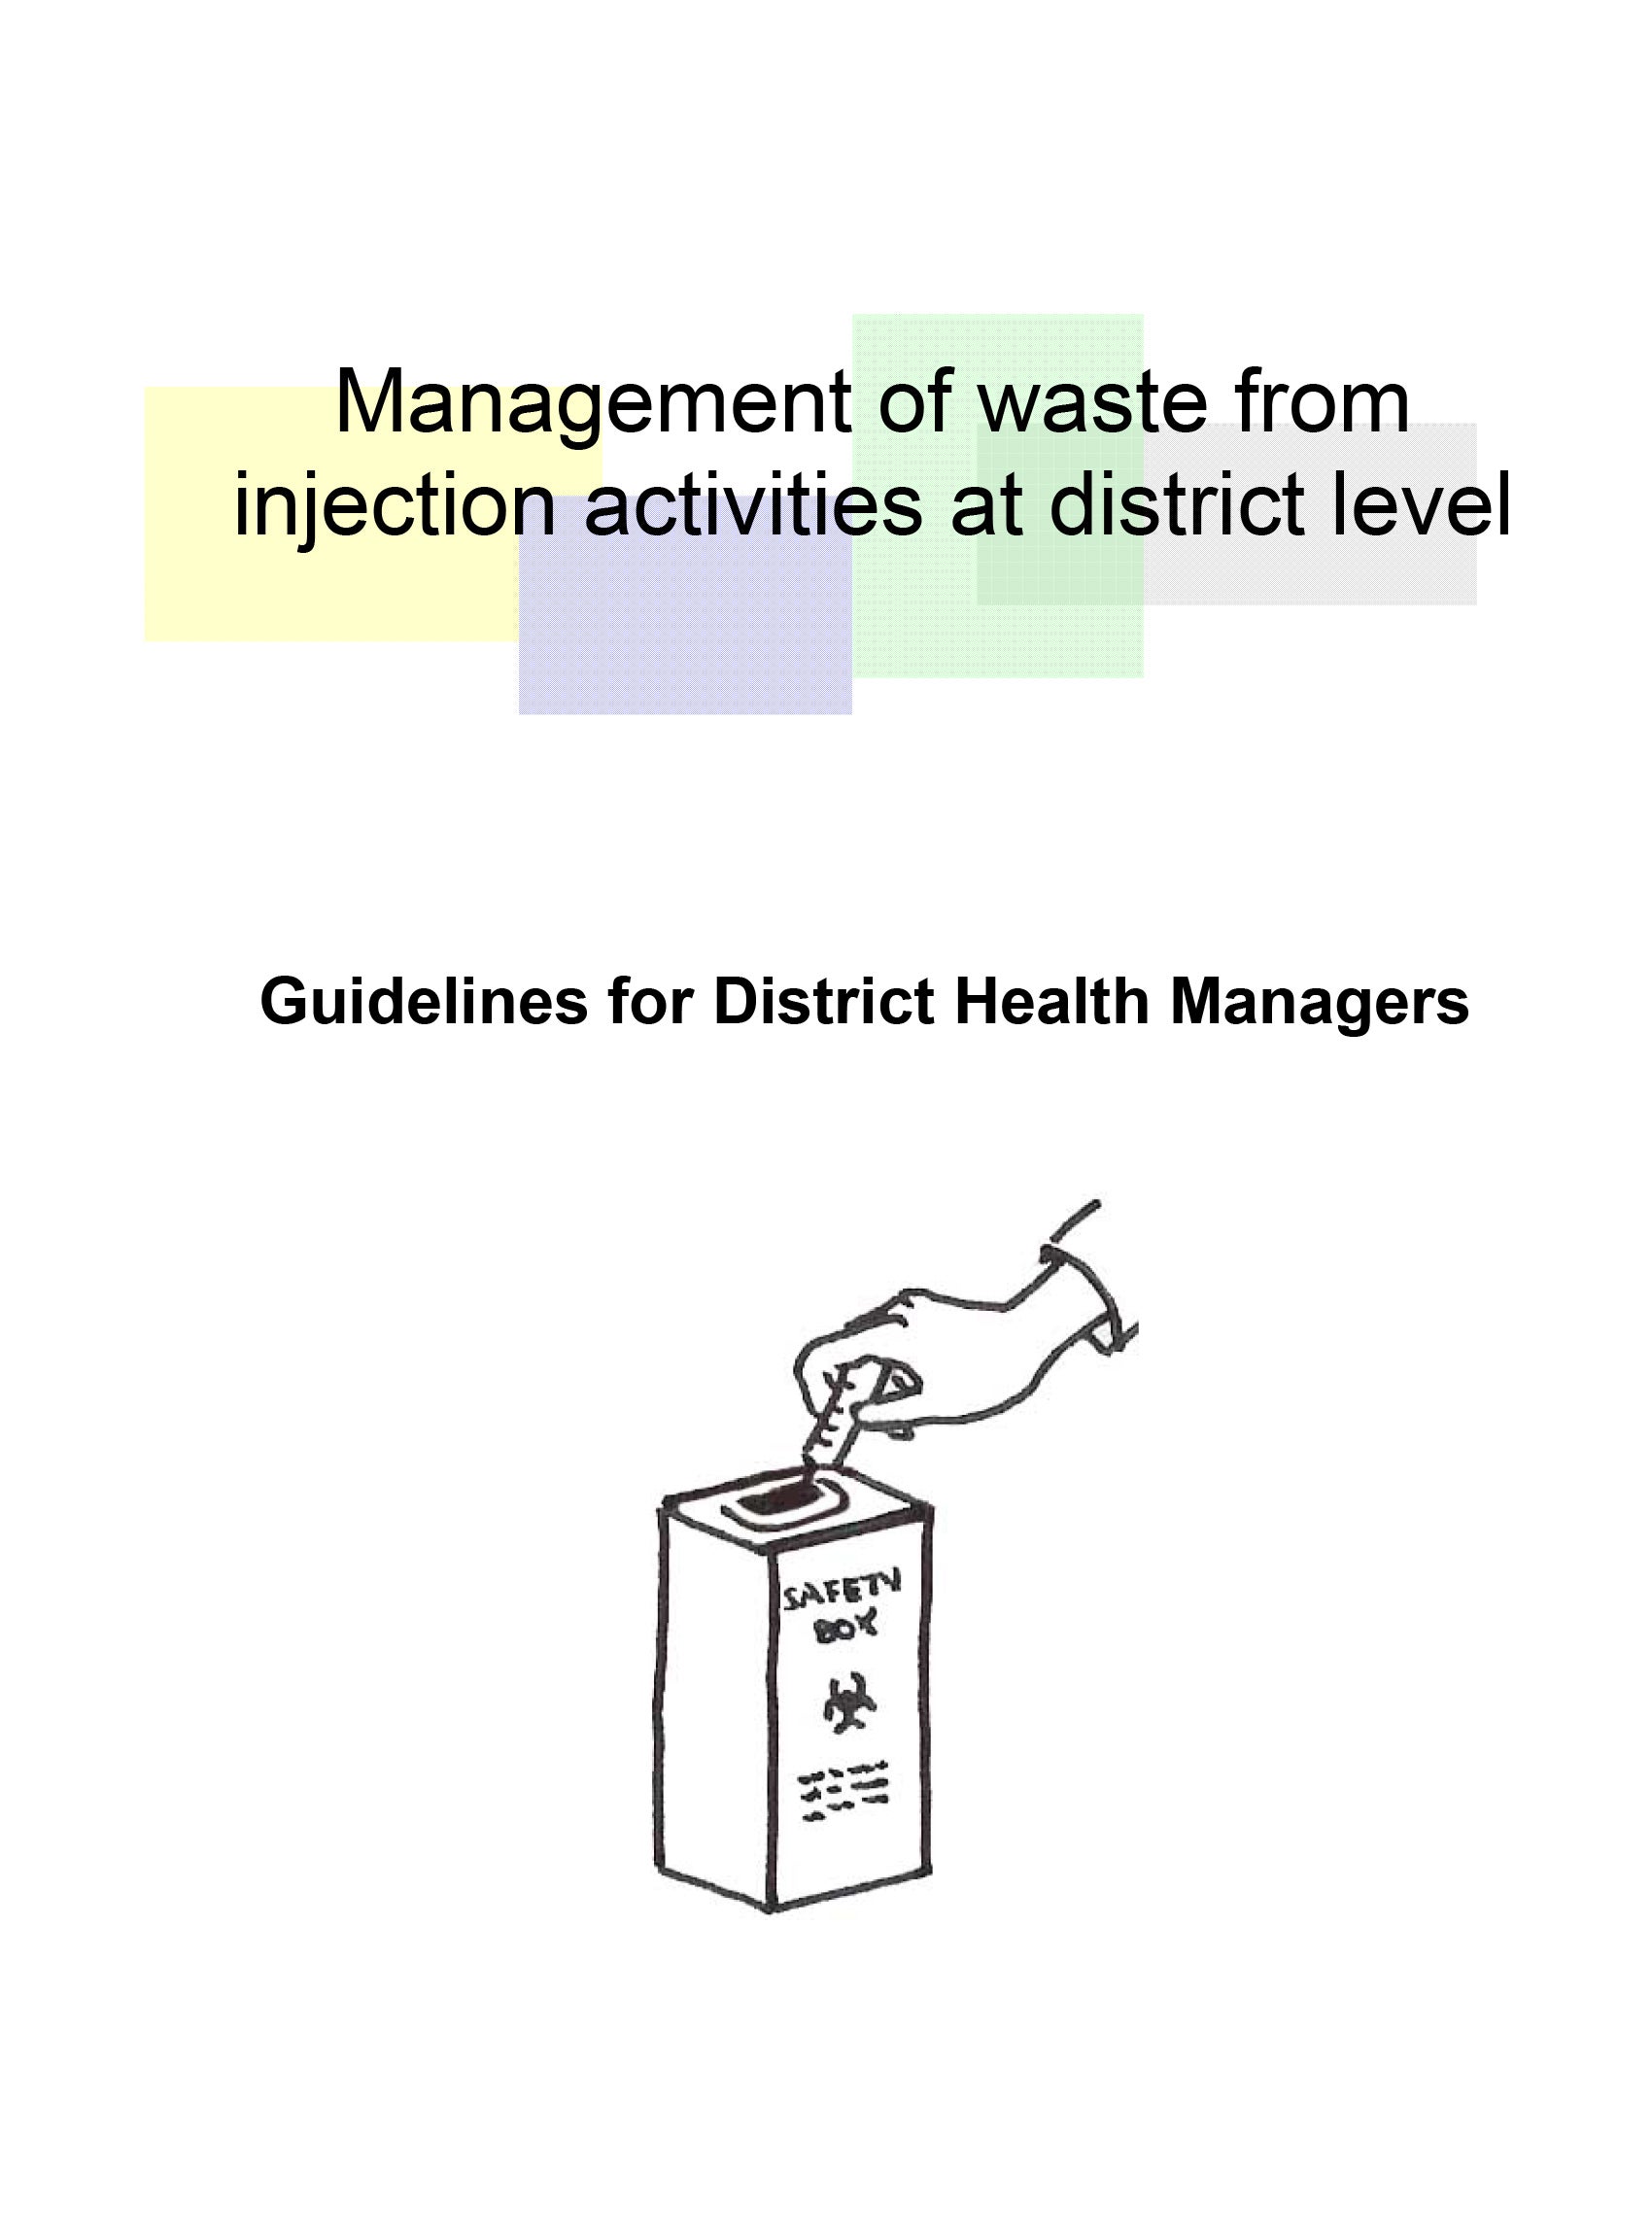 https://www.paho.org/sites/default/files/2022-07/who-management-waste-injection-activities-district-level-en.jpg